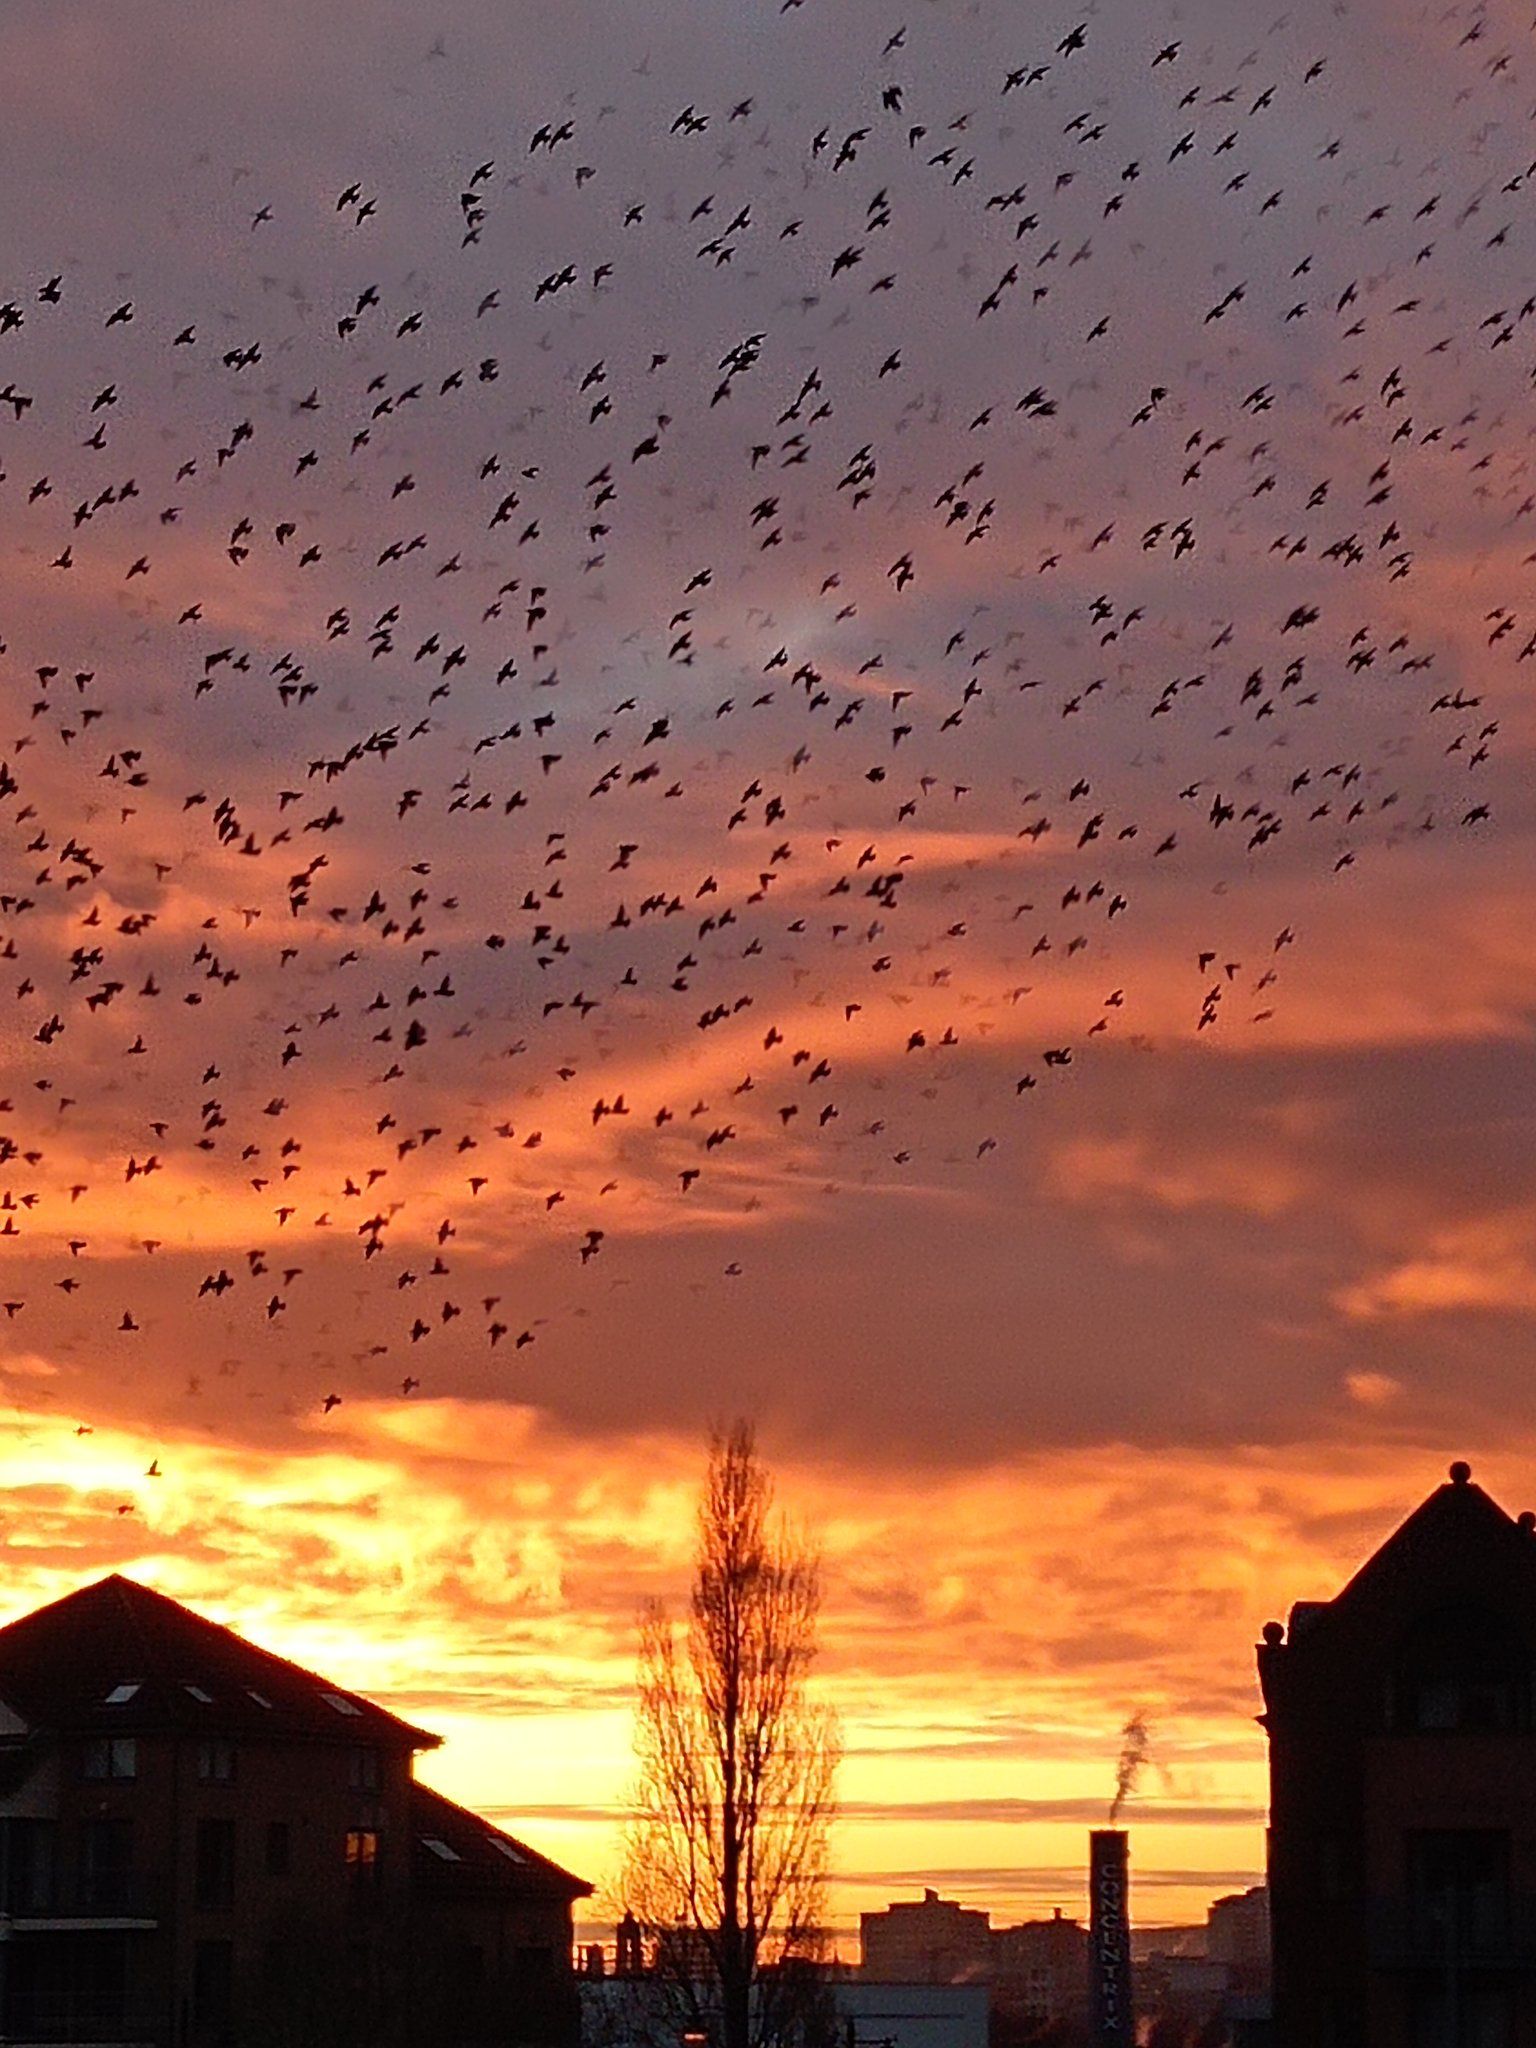 WELCOME BACK: Starlings fled Albert Bridge when floodlights were installed under it – now red filters are helping them make a return